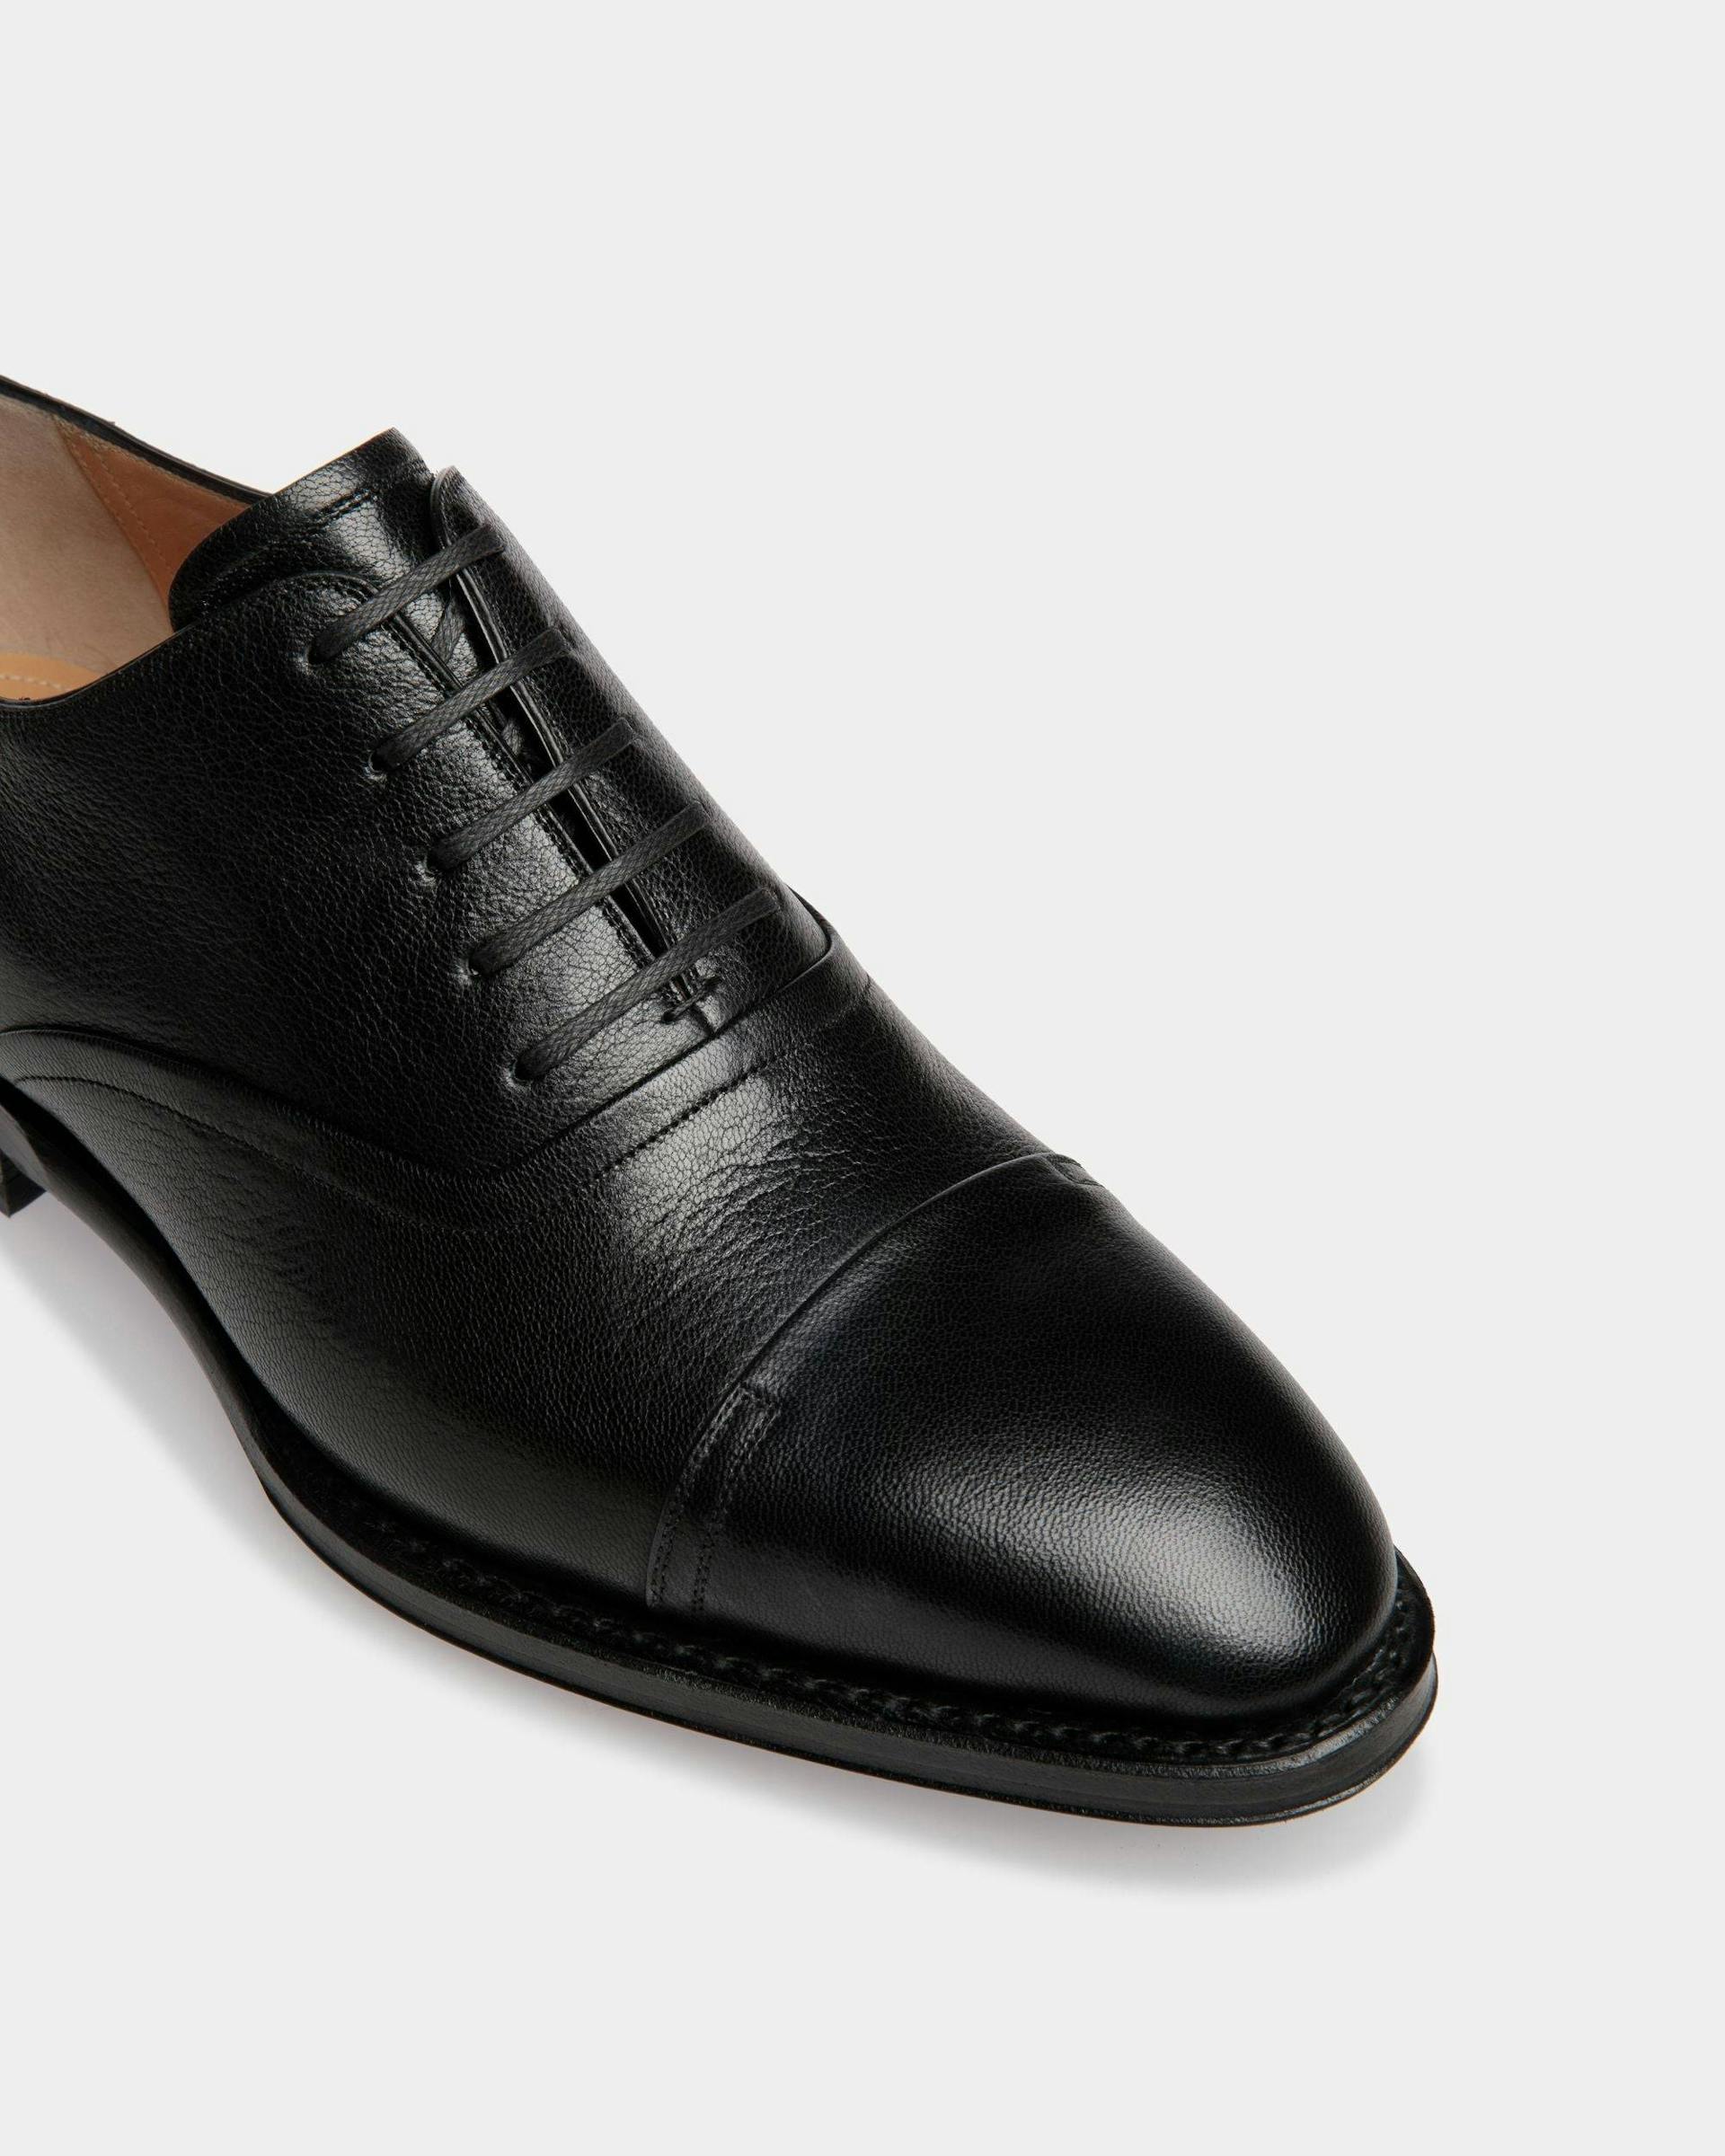 Men's Scribe Oxford in Black Grained Leather | Bally | Still Life Detail